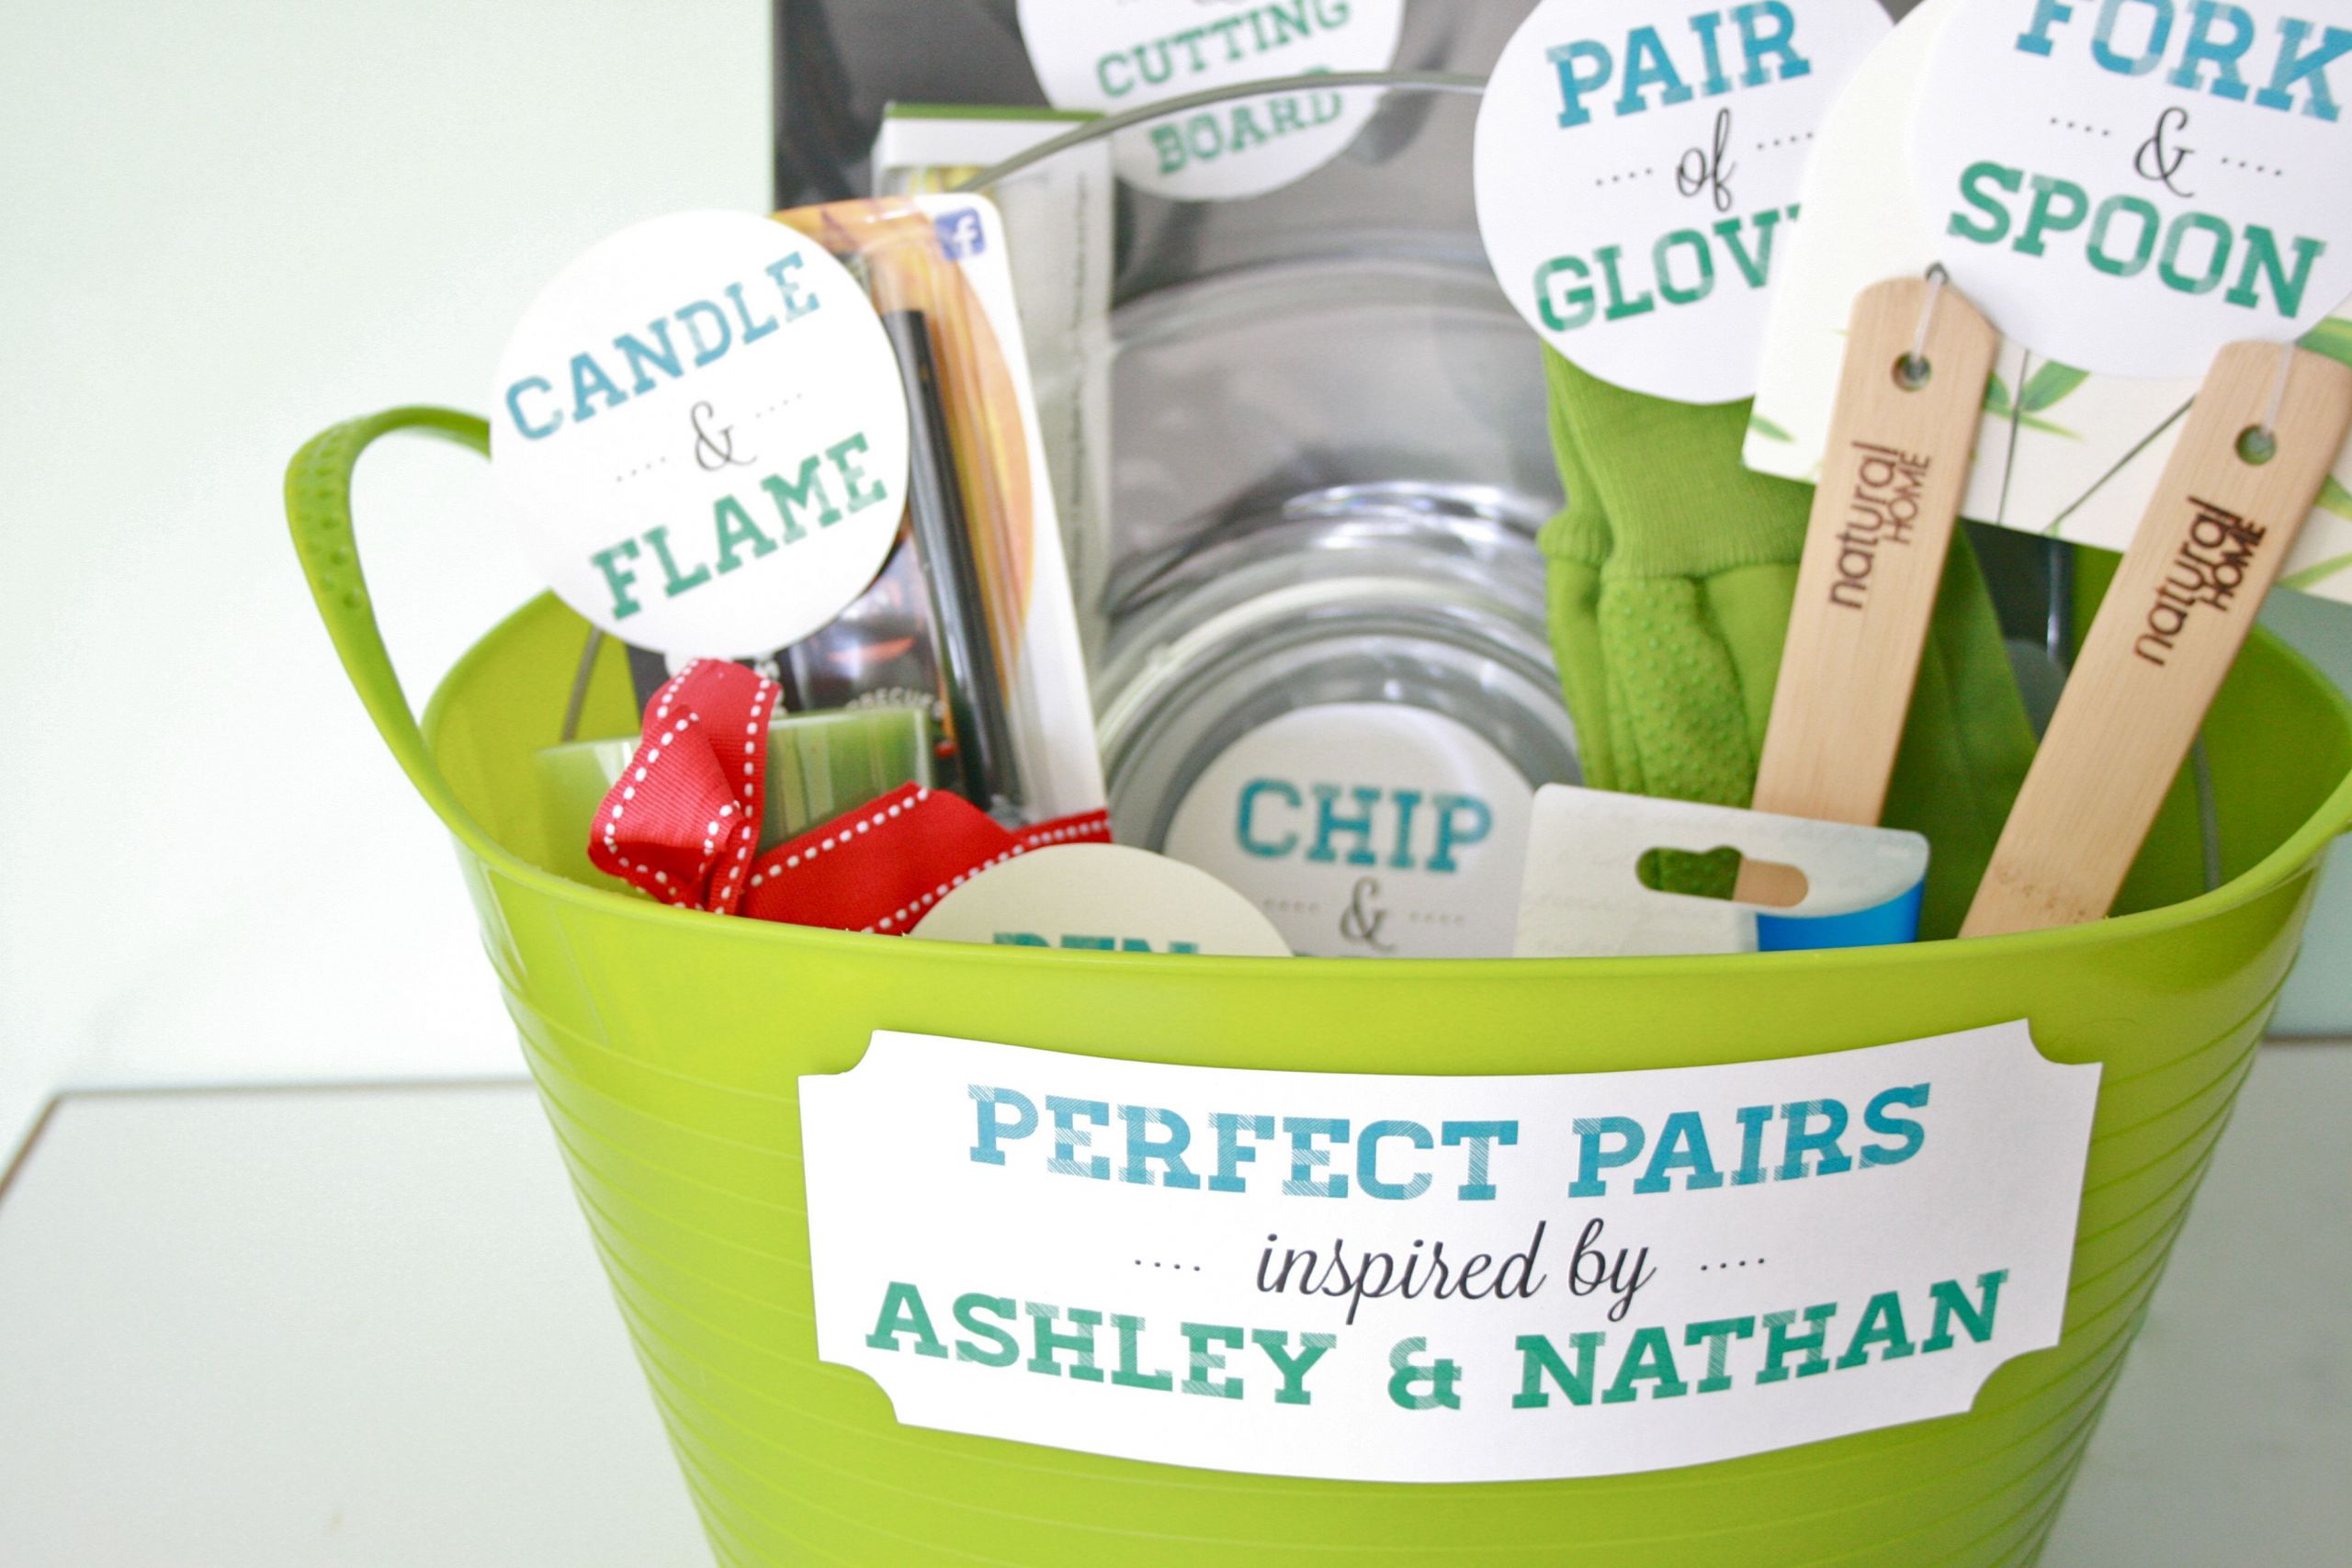 Wedding Gift Ideas For Couple Already Living Together
 DIY "Perfect Pairs" Bridal Shower Gift